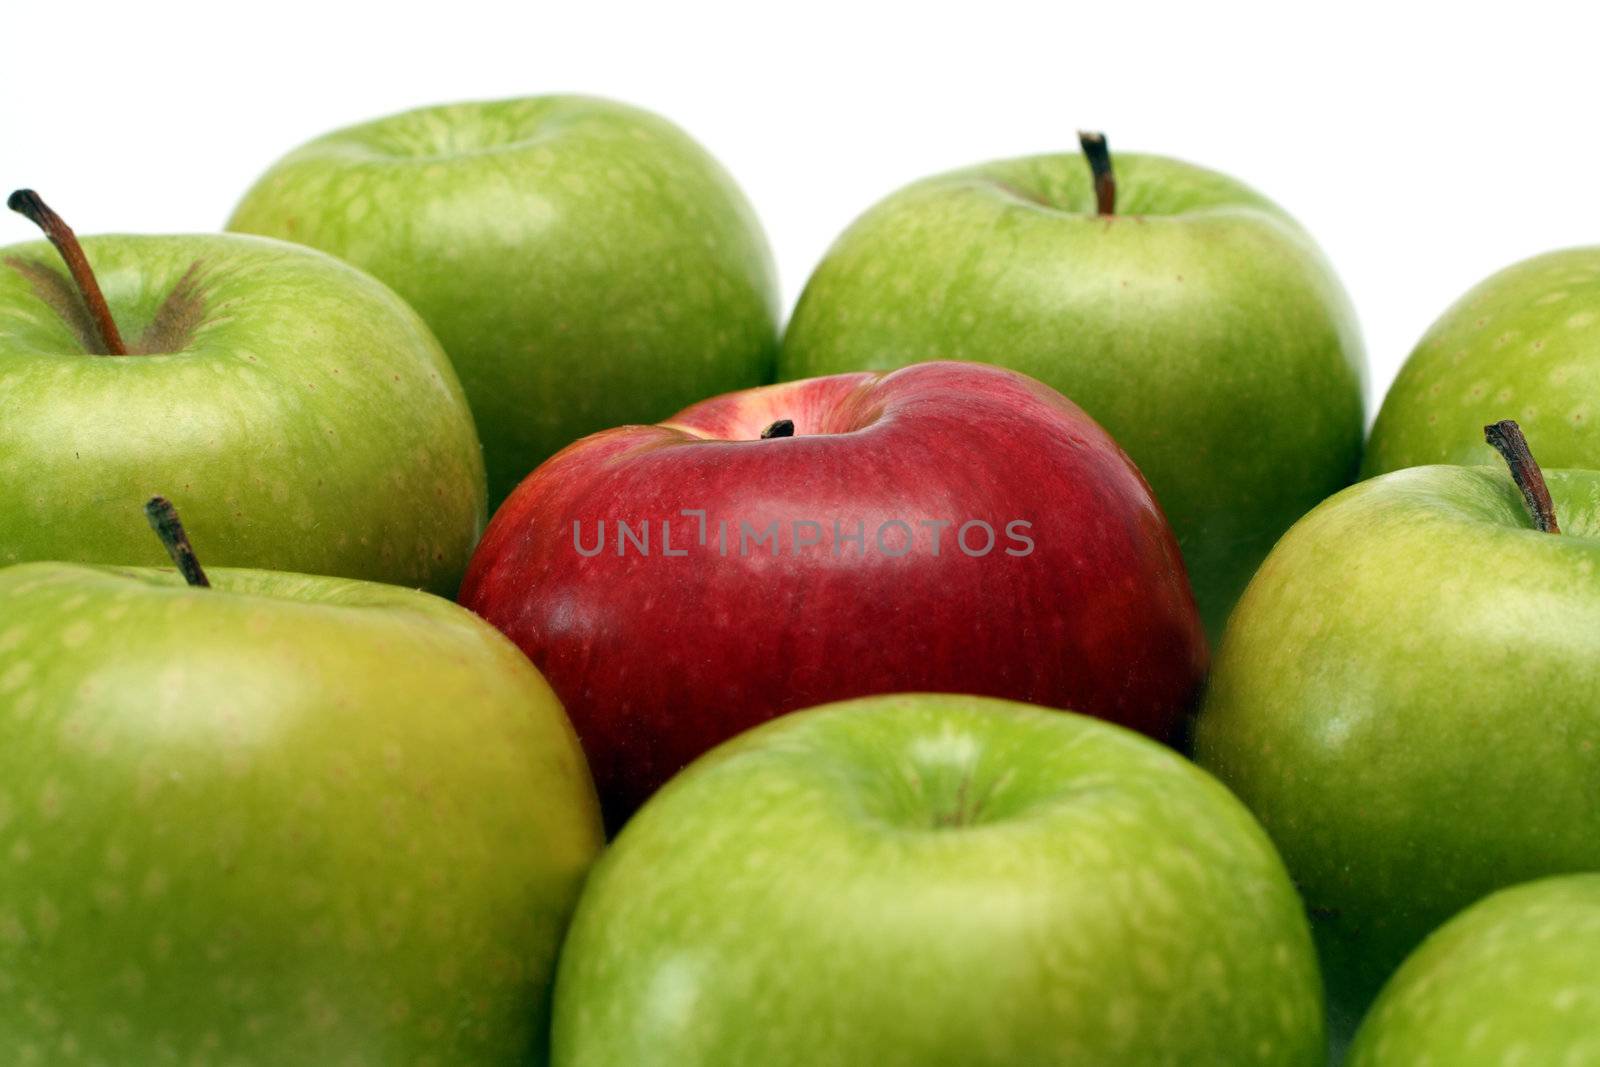 separation concepts - red apple between green apples